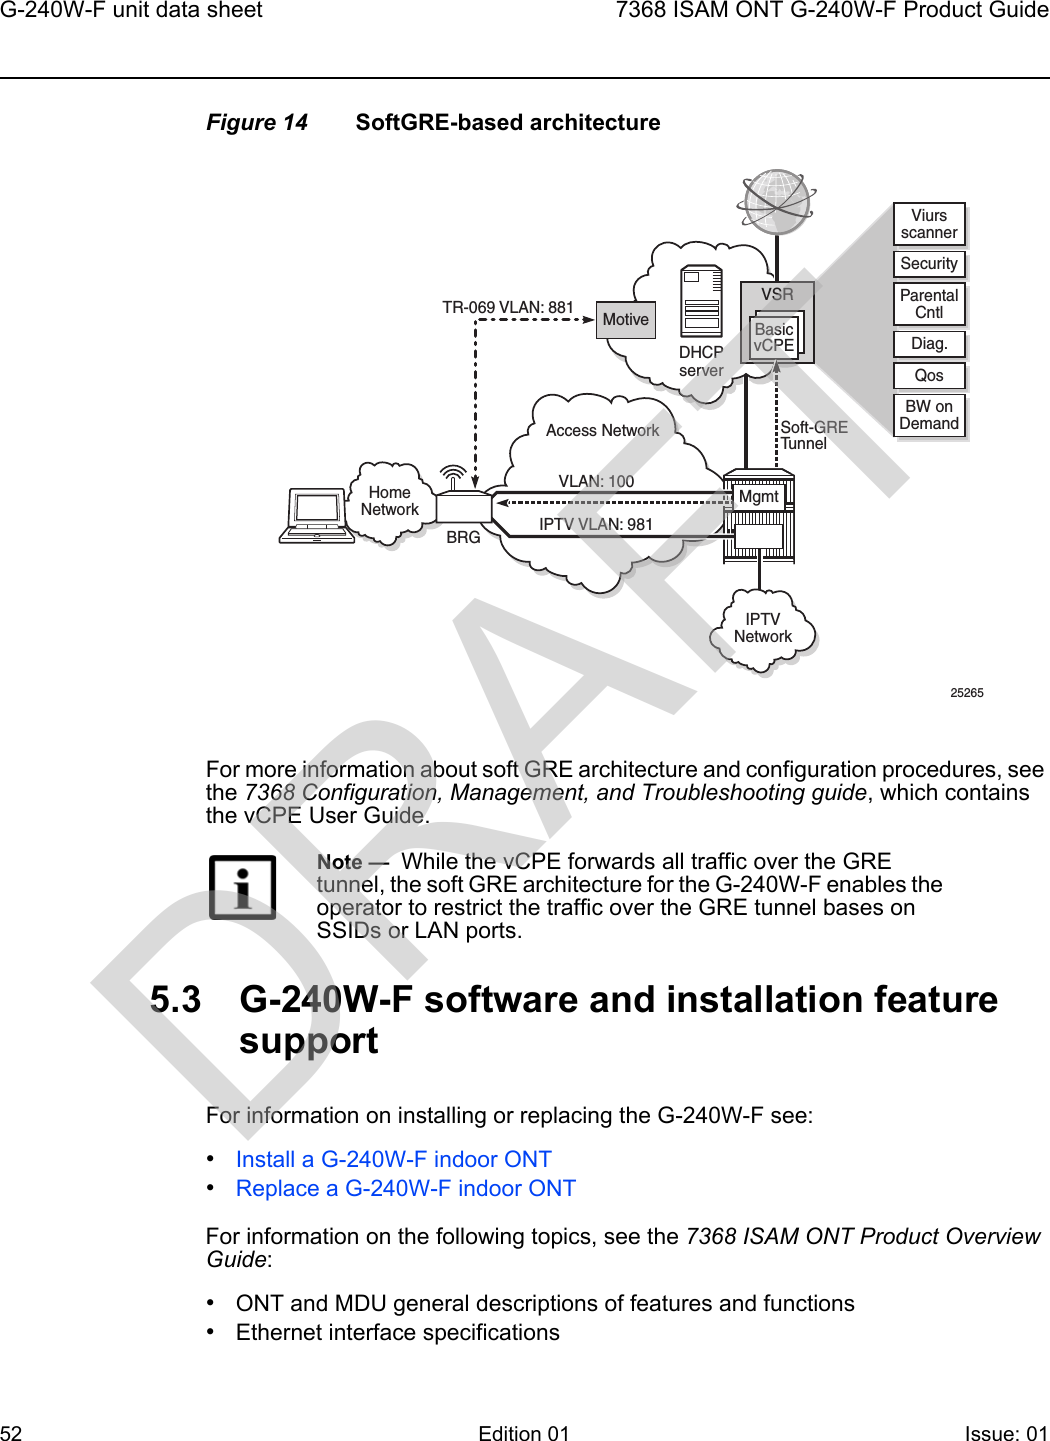 G-240W-F unit data sheet527368 ISAM ONT G-240W-F Product GuideEdition 01 Issue: 01 Figure 14 SoftGRE-based architectureFor more information about soft GRE architecture and configuration procedures, see the 7368 Configuration, Management, and Troubleshooting guide, which contains the vCPE User Guide. 5.3 G-240W-F software and installation feature supportFor information on installing or replacing the G-240W-F see:•Install a G-240W-F indoor ONT•Replace a G-240W-F indoor ONTFor information on the following topics, see the 7368 ISAM ONT Product Overview Guide:•ONT and MDU general descriptions of features and functions•Ethernet interface specificationsNote —  While the vCPE forwards all traffic over the GRE tunnel, the soft GRE architecture for the G-240W-F enables the operator to restrict the traffic over the GRE tunnel bases on SSIDs or LAN ports.DHCPserverMotiveAccess NetworkSecurityDiag.QosViursscannerParentalCntlBW onDemandBasicvCPEVSRHomeNetworkVLAN: 100Soft-GRETunnelTR-069 VLAN: 881IPTV VLAN: 981MgmtIPTVNetworkBRG25265DRAFT